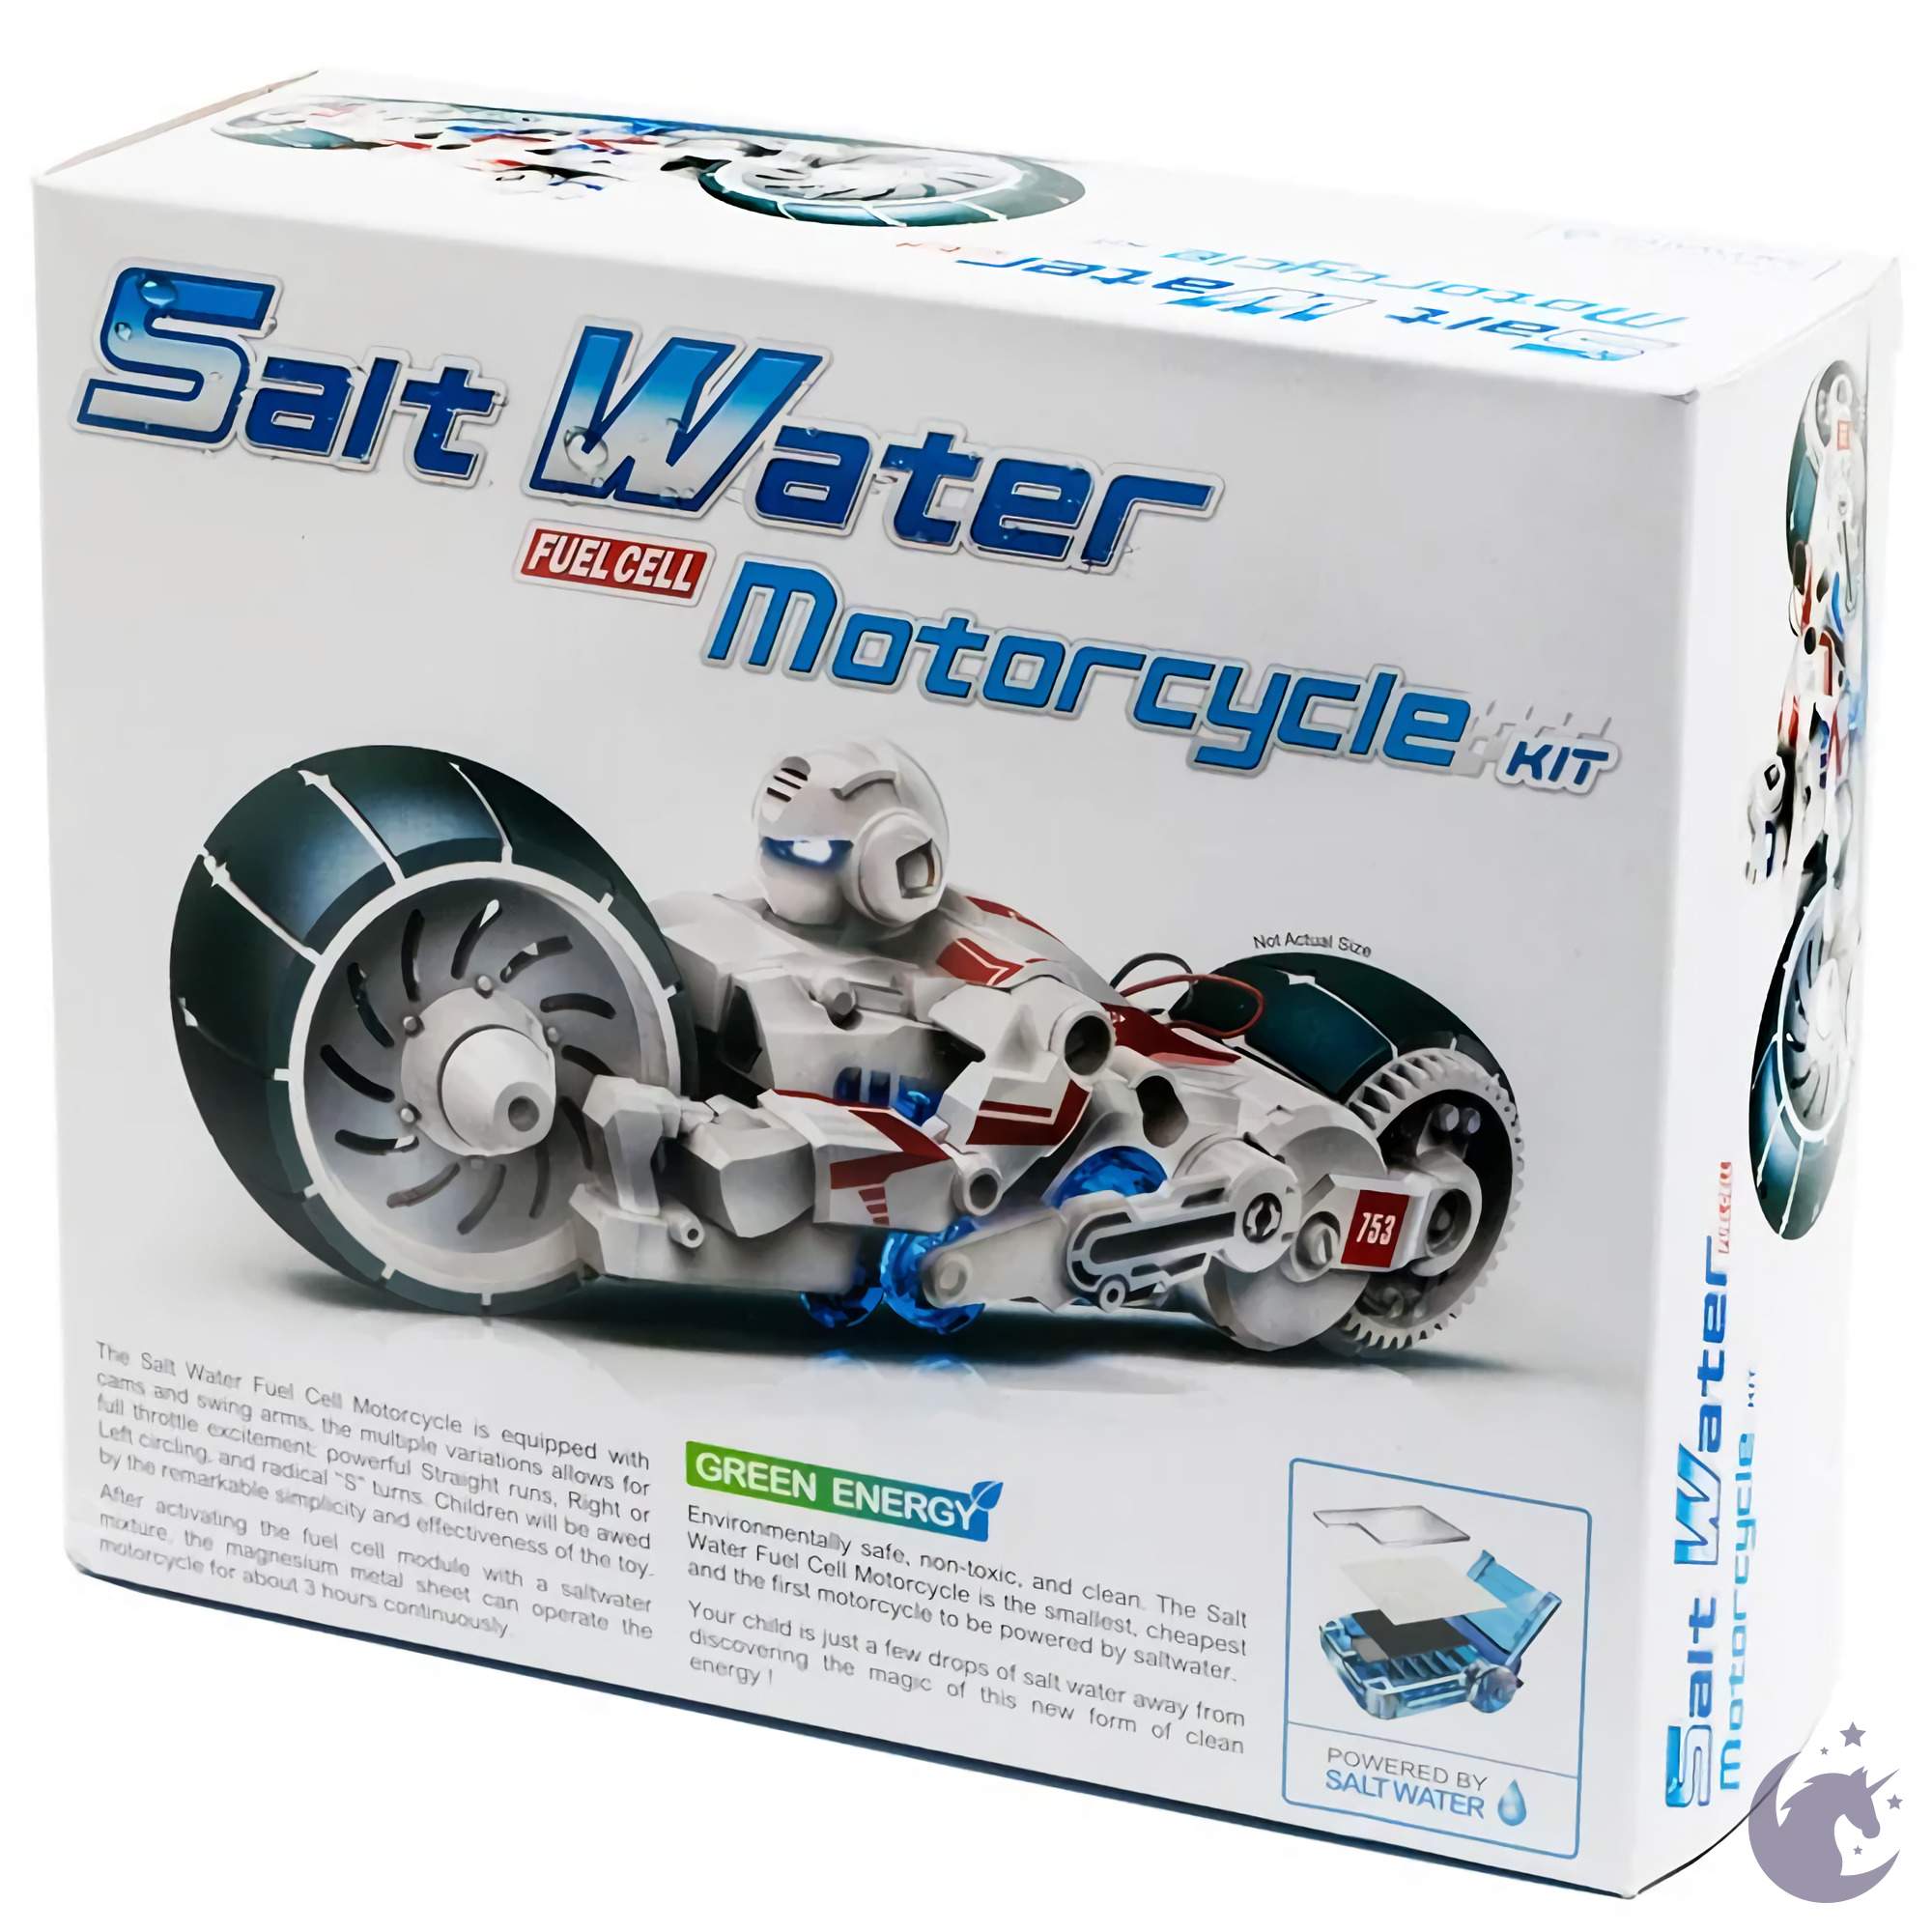 unicorntoys cic kits salt water fuel cell engine motorcycle educational robot kit engineering stem toys for kids CIC21-753